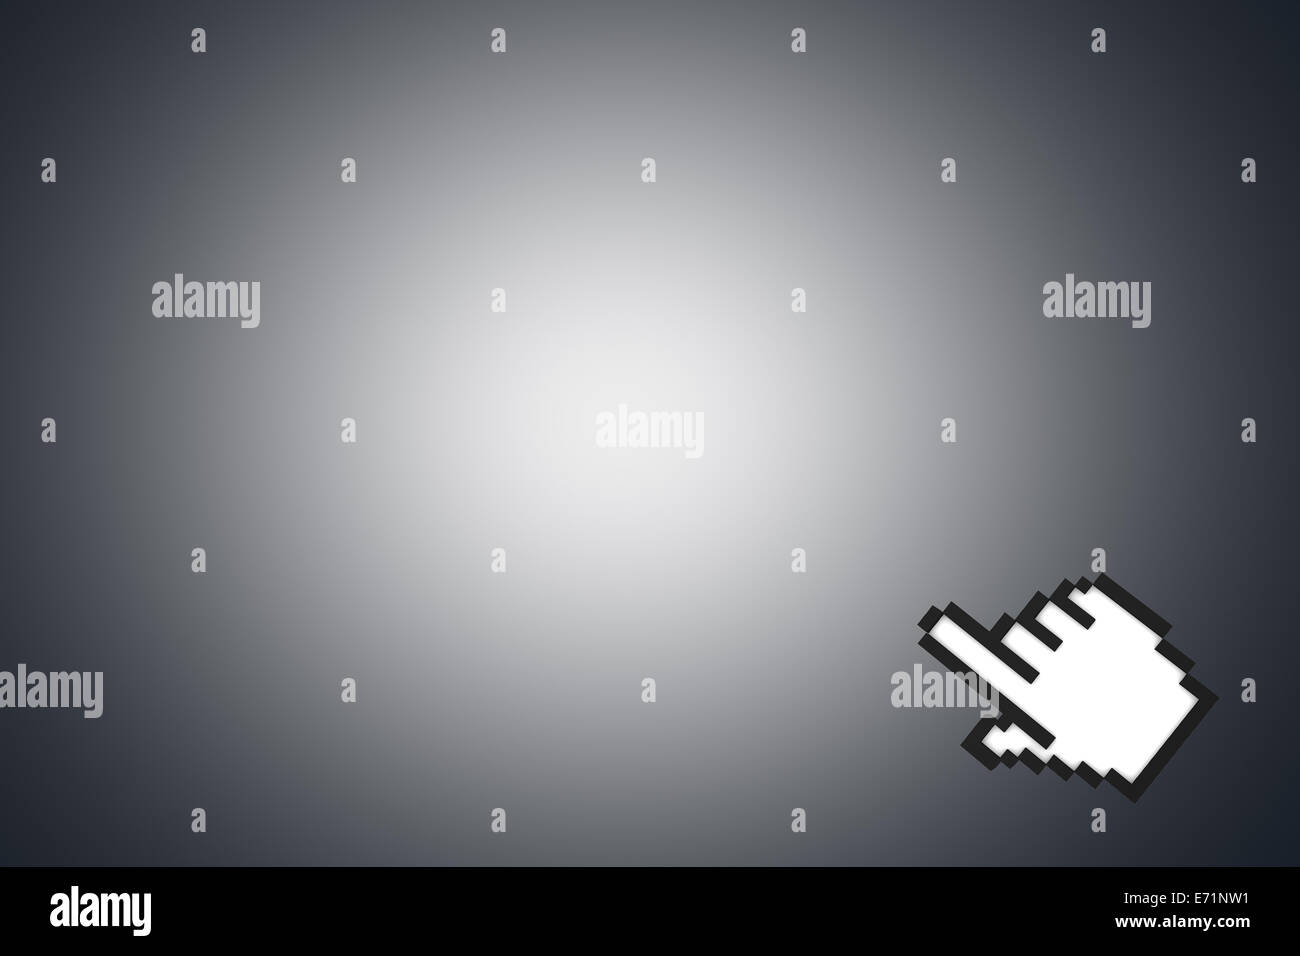 Computer technology mouse hand cursor symbol on dark background with copy space. Stock Photo